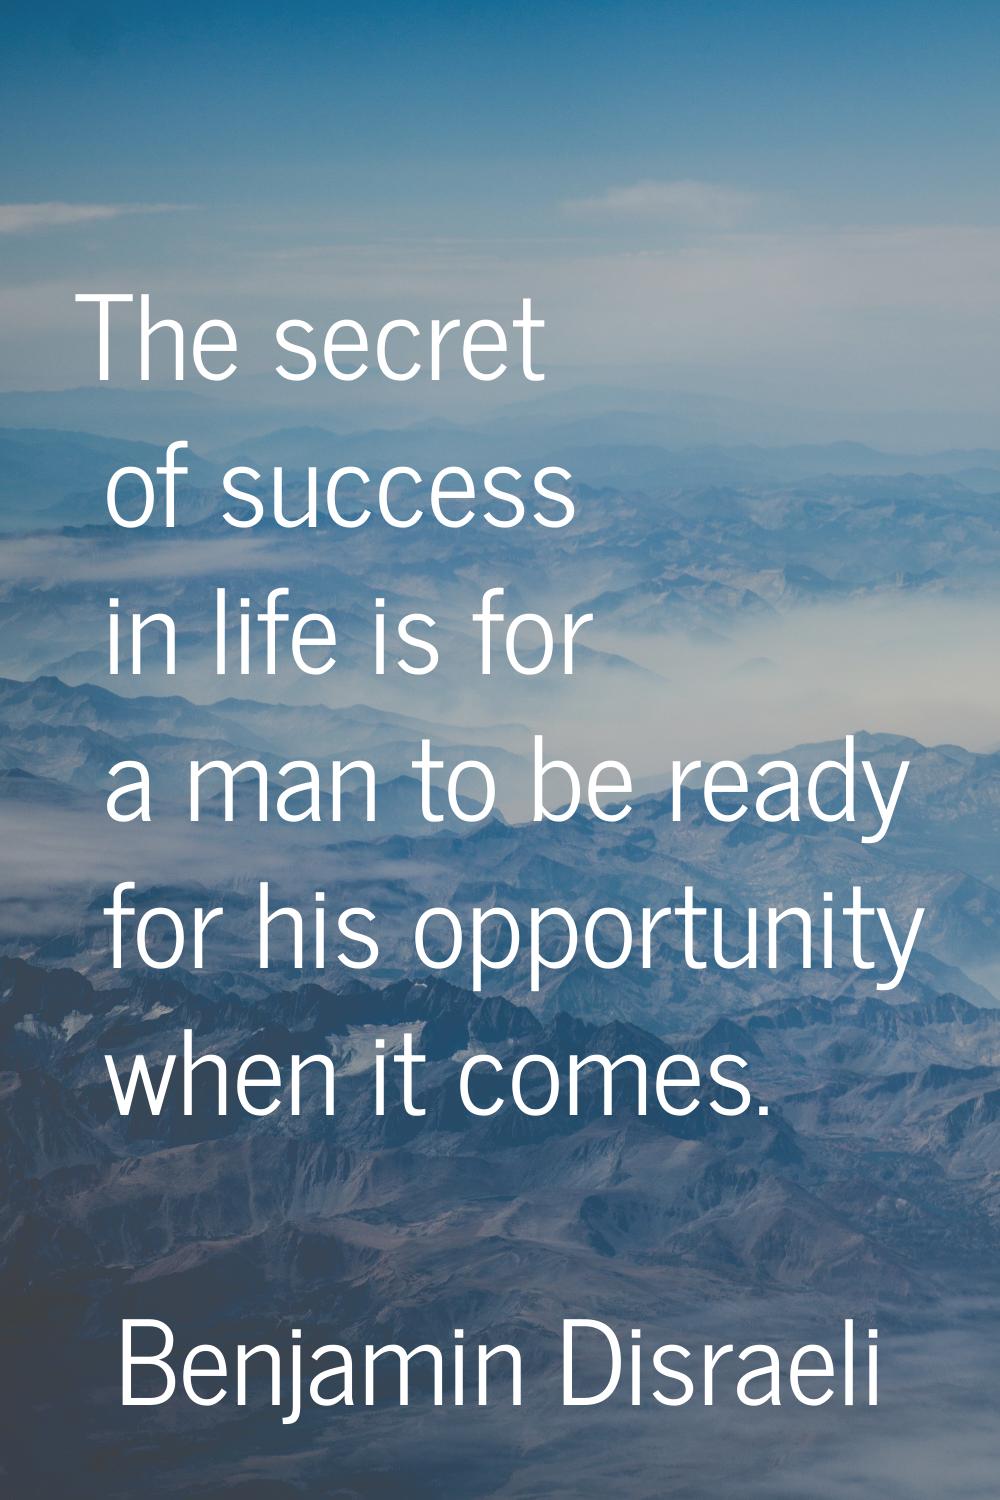 The secret of success in life is for a man to be ready for his opportunity when it comes.